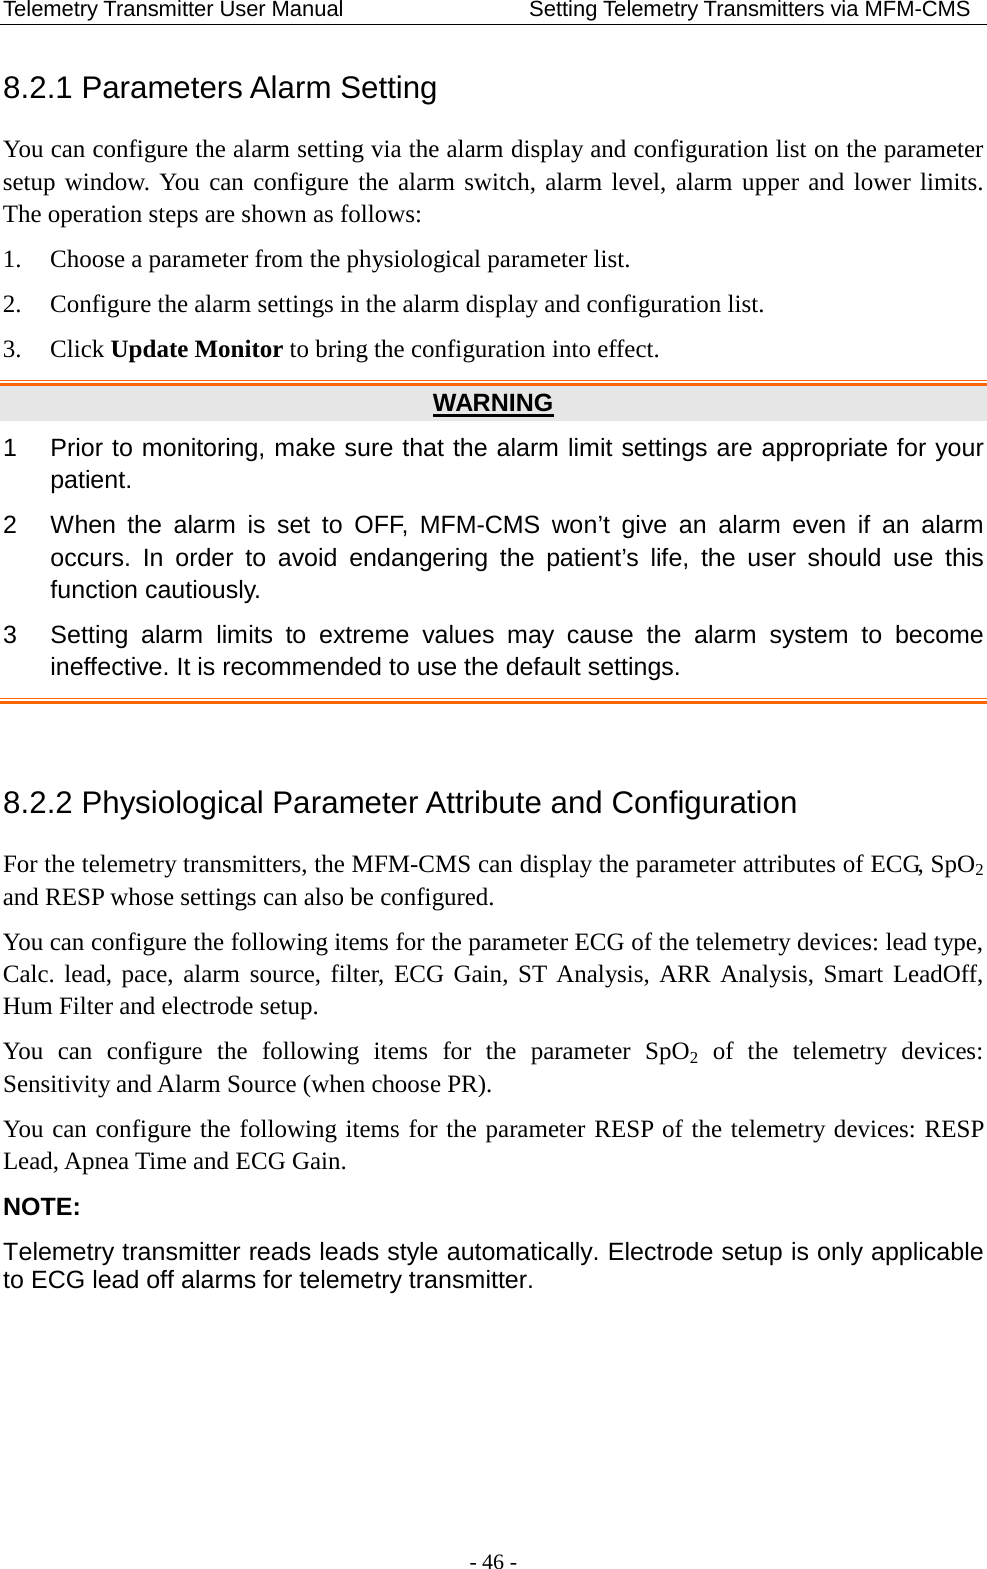 Telemetry Transmitter User Manual                 Setting Telemetry Transmitters via MFM-CMS 8.2.1 Parameters Alarm Setting You can configure the alarm setting via the alarm display and configuration list on the parameter setup window. You can configure the alarm switch, alarm level, alarm upper and lower limits. The operation steps are shown as follows: 1. Choose a parameter from the physiological parameter list. 2. Configure the alarm settings in the alarm display and configuration list. 3. Click Update Monitor to bring the configuration into effect. WARNING 1  Prior to monitoring, make sure that the alarm limit settings are appropriate for your patient. 2  When the alarm is set to OFF, MFM-CMS won’t give an alarm even if an alarm occurs. In order to avoid endangering the patient’s life, the user should use this function cautiously. 3  Setting alarm limits to extreme values may cause the alarm system to become ineffective. It is recommended to use the default settings.  8.2.2 Physiological Parameter Attribute and Configuration For the telemetry transmitters, the MFM-CMS can display the parameter attributes of ECG, SpO2 and RESP whose settings can also be configured. You can configure the following items for the parameter ECG of the telemetry devices: lead type, Calc. lead, pace, alarm source, filter, ECG Gain, ST Analysis, ARR Analysis, Smart LeadOff, Hum Filter and electrode setup. You can configure the following items for the parameter SpO2 of the telemetry  devices: Sensitivity and Alarm Source (when choose PR). You can configure the following items for the parameter RESP of the telemetry devices: RESP Lead, Apnea Time and ECG Gain. NOTE: Telemetry transmitter reads leads style automatically. Electrode setup is only applicable to ECG lead off alarms for telemetry transmitter.  - 46 - 